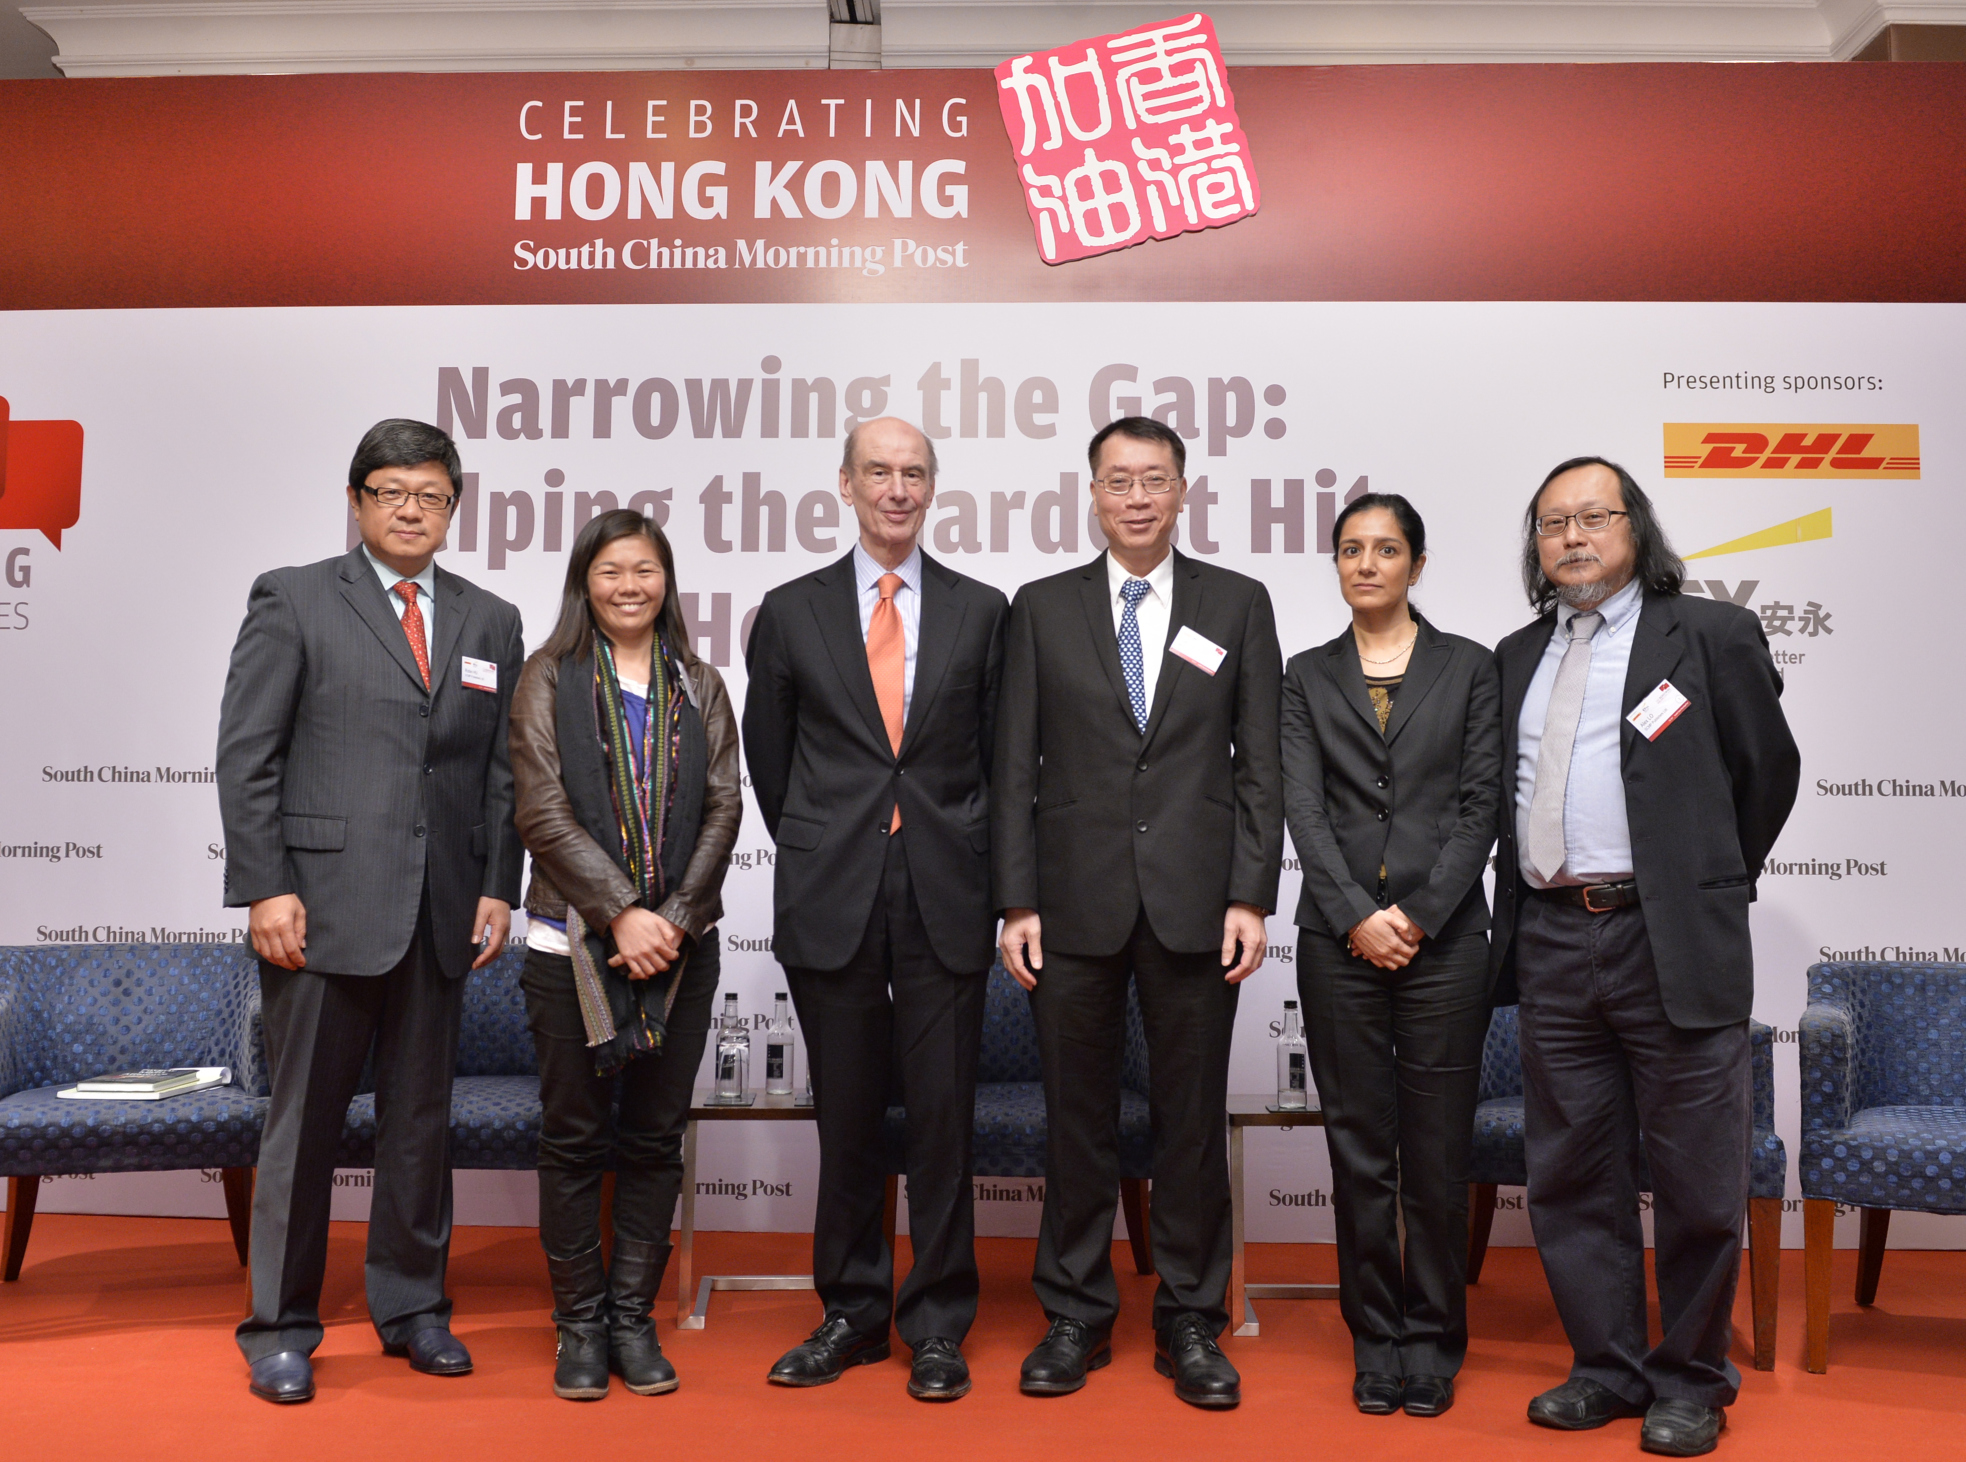 (Left to right) Robin Hu, CEO of SCMP Group; Fermi Wong, founder and executive director of Hong Kong Unison; Leo Goodstadt, former Chief Policy Advisor to the Hong Kong Government; Prof. Francis Lui from Hong Kong University of Science and Technology; Shalini Mahtani, founder & board of director of Community Business; Alex Lo, SCMP Columnist.